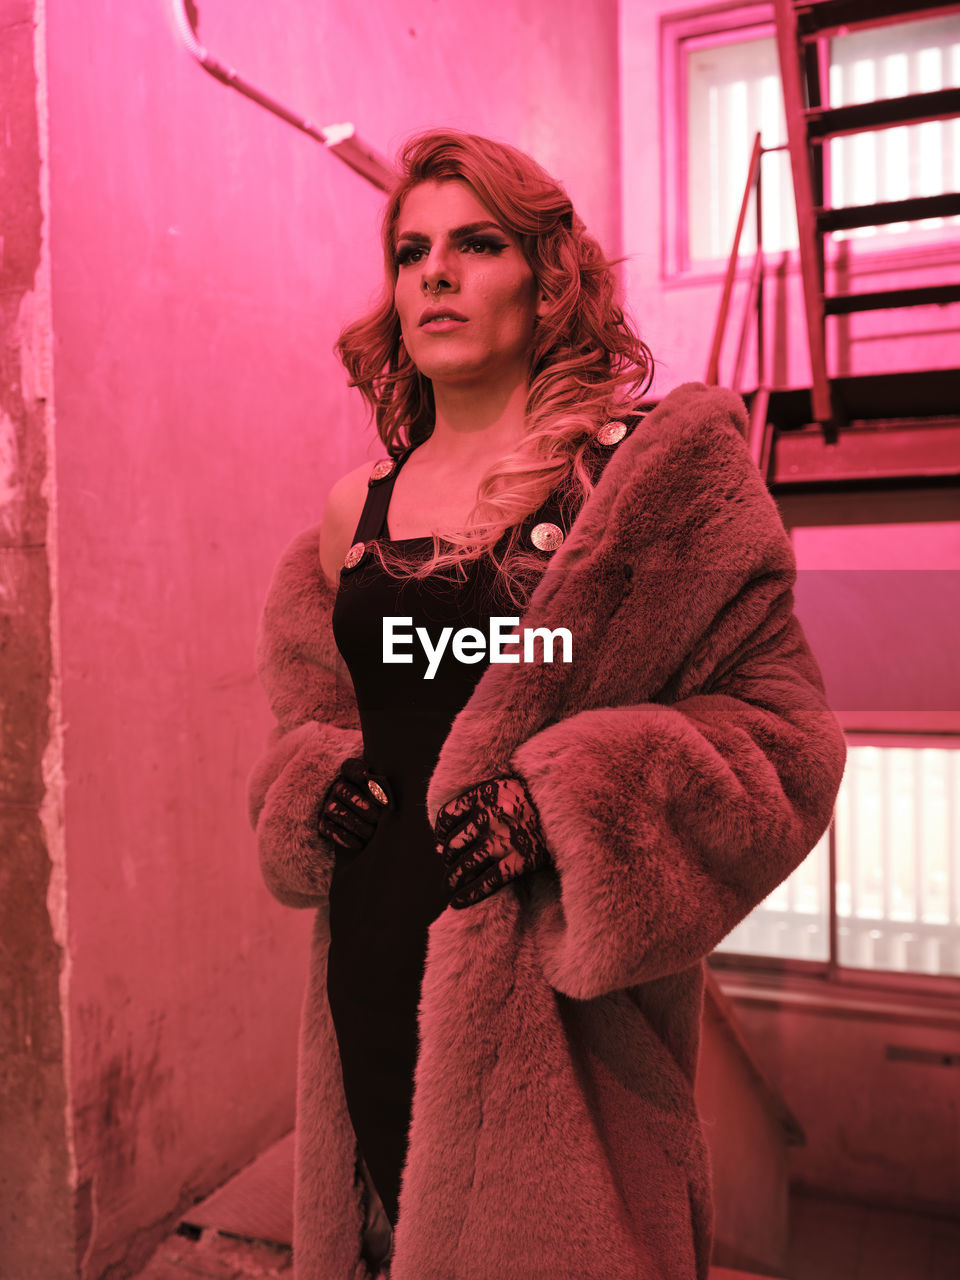 Stylish drag queen in elegant dress and fur coat looking away while standing near staircase under red light inside grungy building